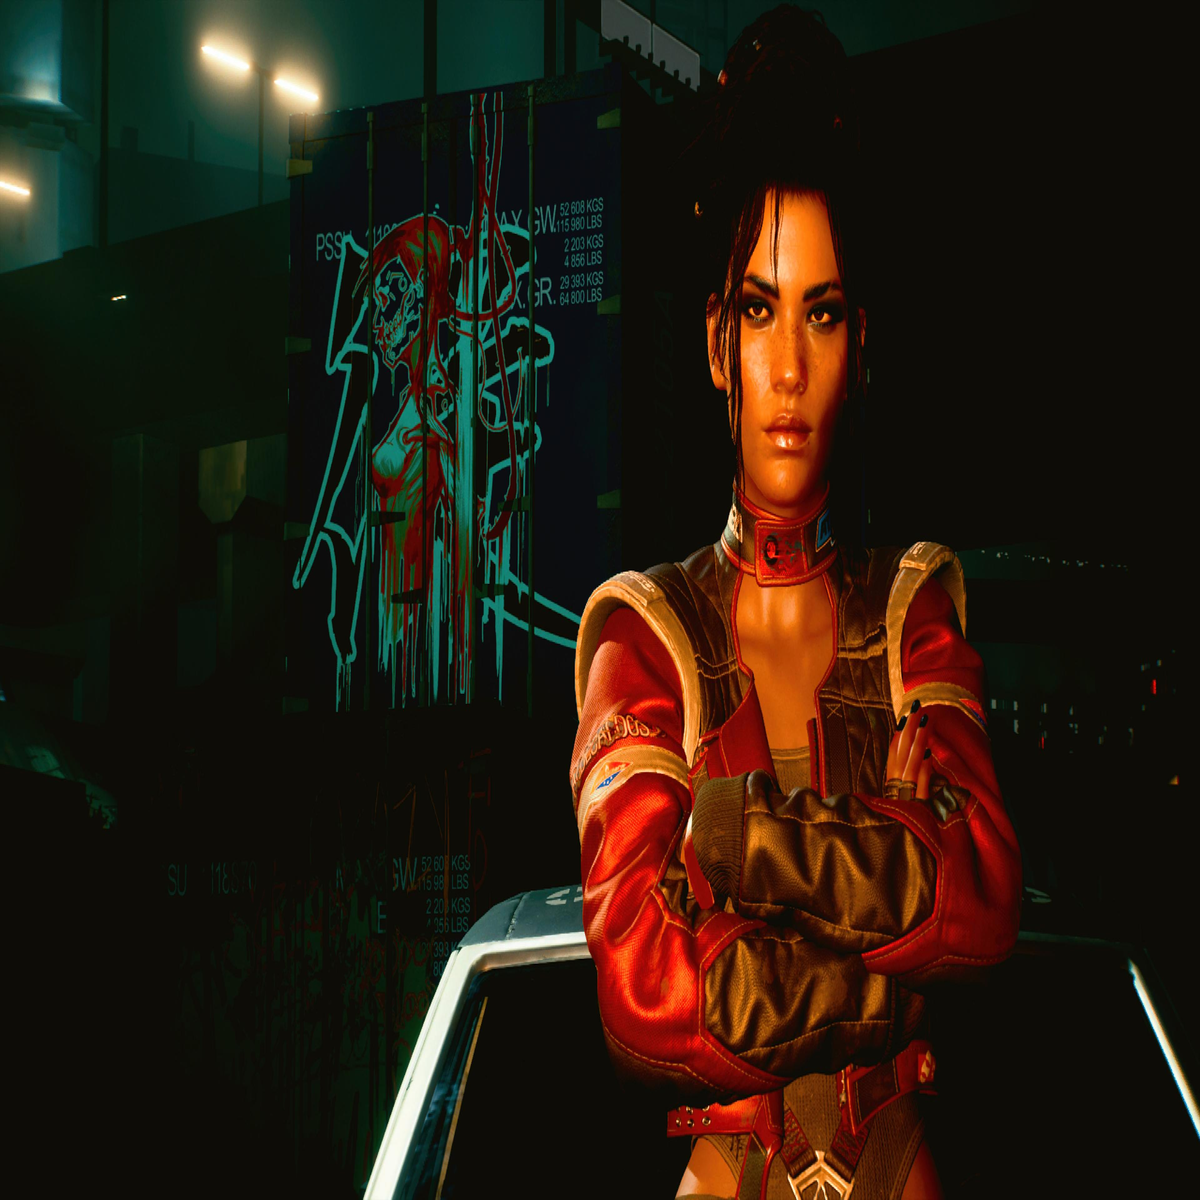 One Of Cyberpunk 2077's Coolest Characters Isn't Even In The Game